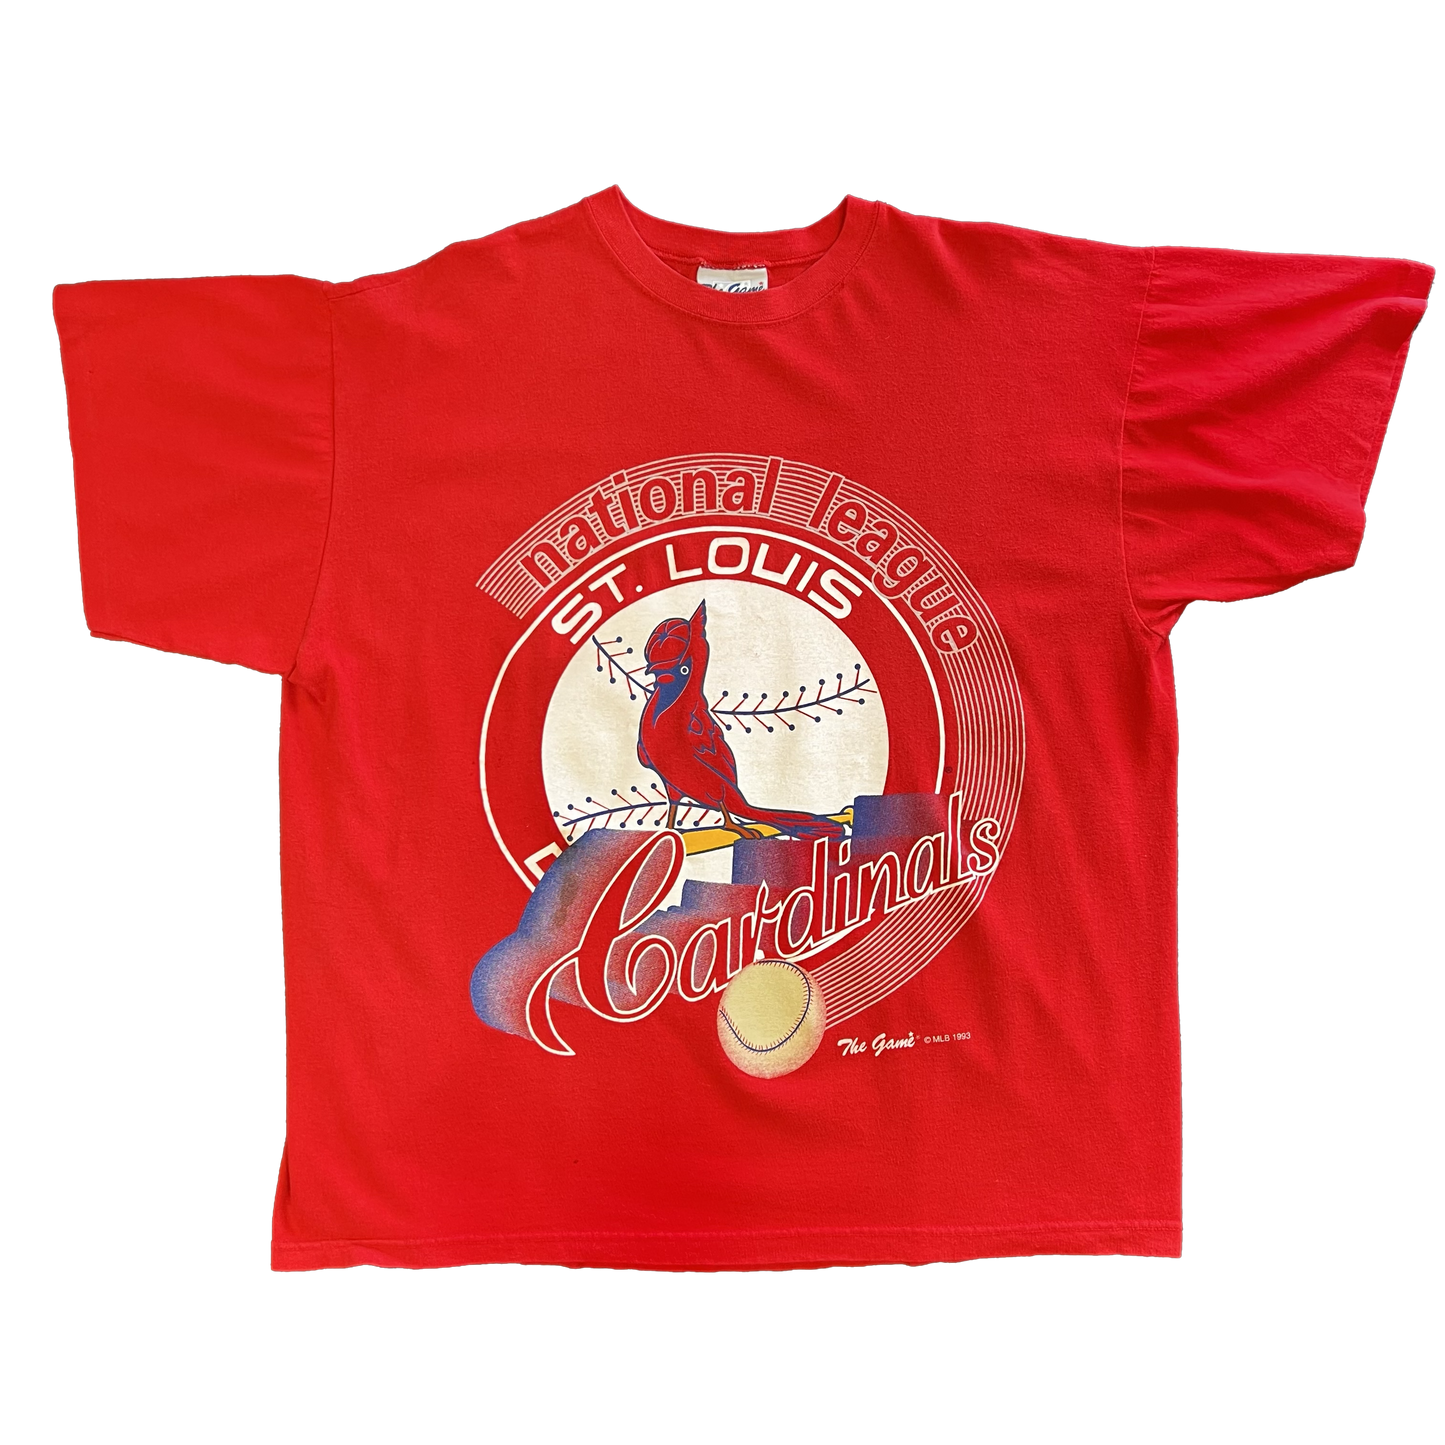 Vintage 1993 St. Louis Cardinals The Game® Tee - X-Large - Red